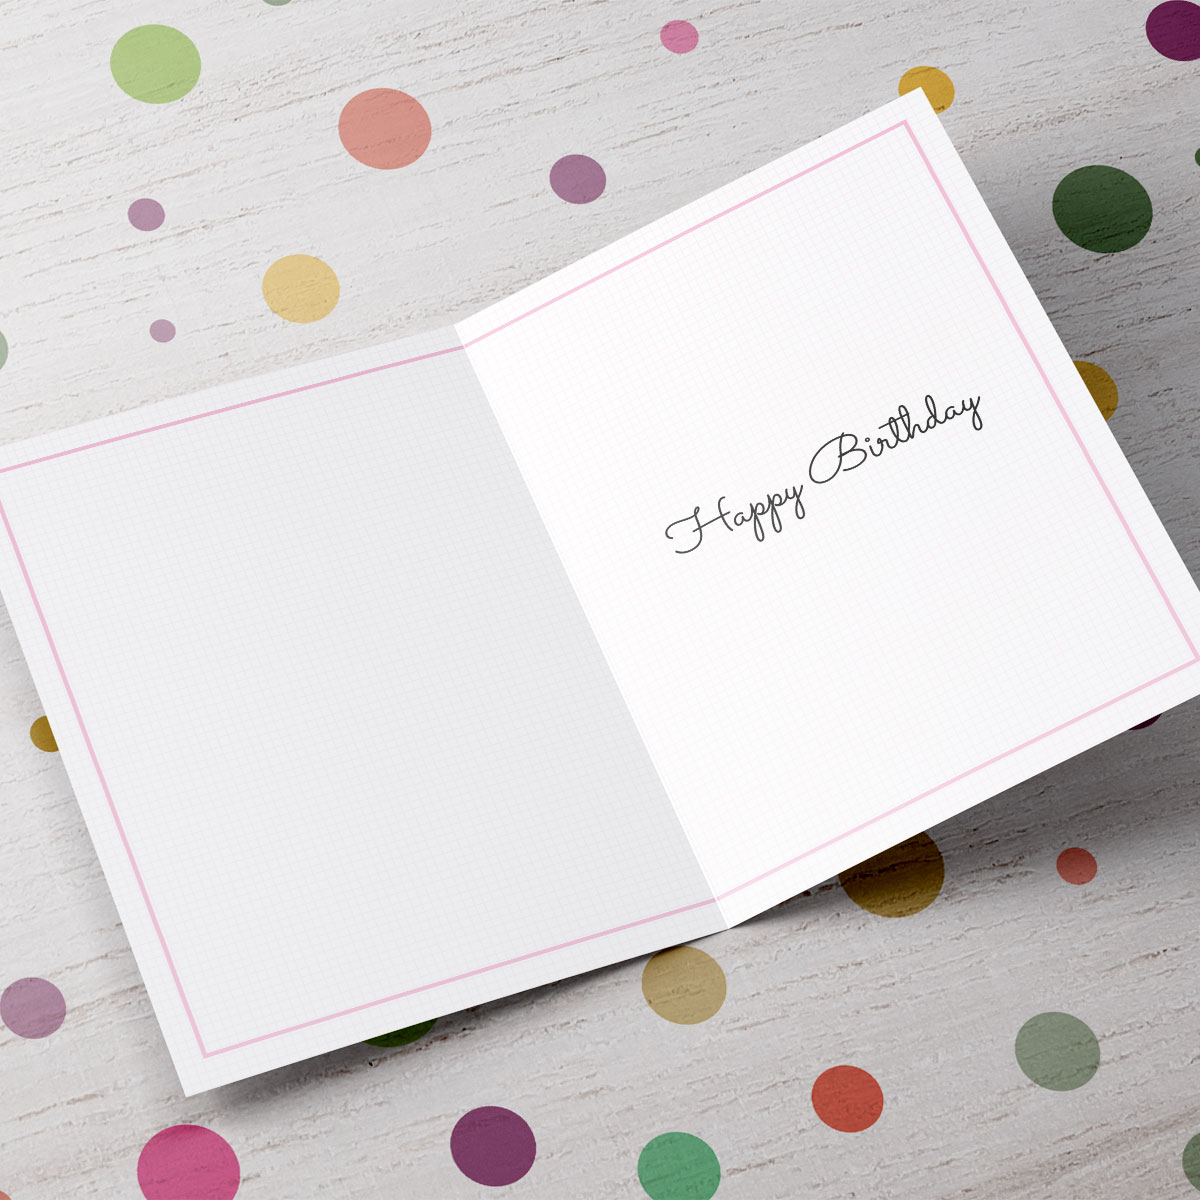 Buy Personalised Birthday Card - Turn Up The Mojito for GBP 1.79 | Card ...